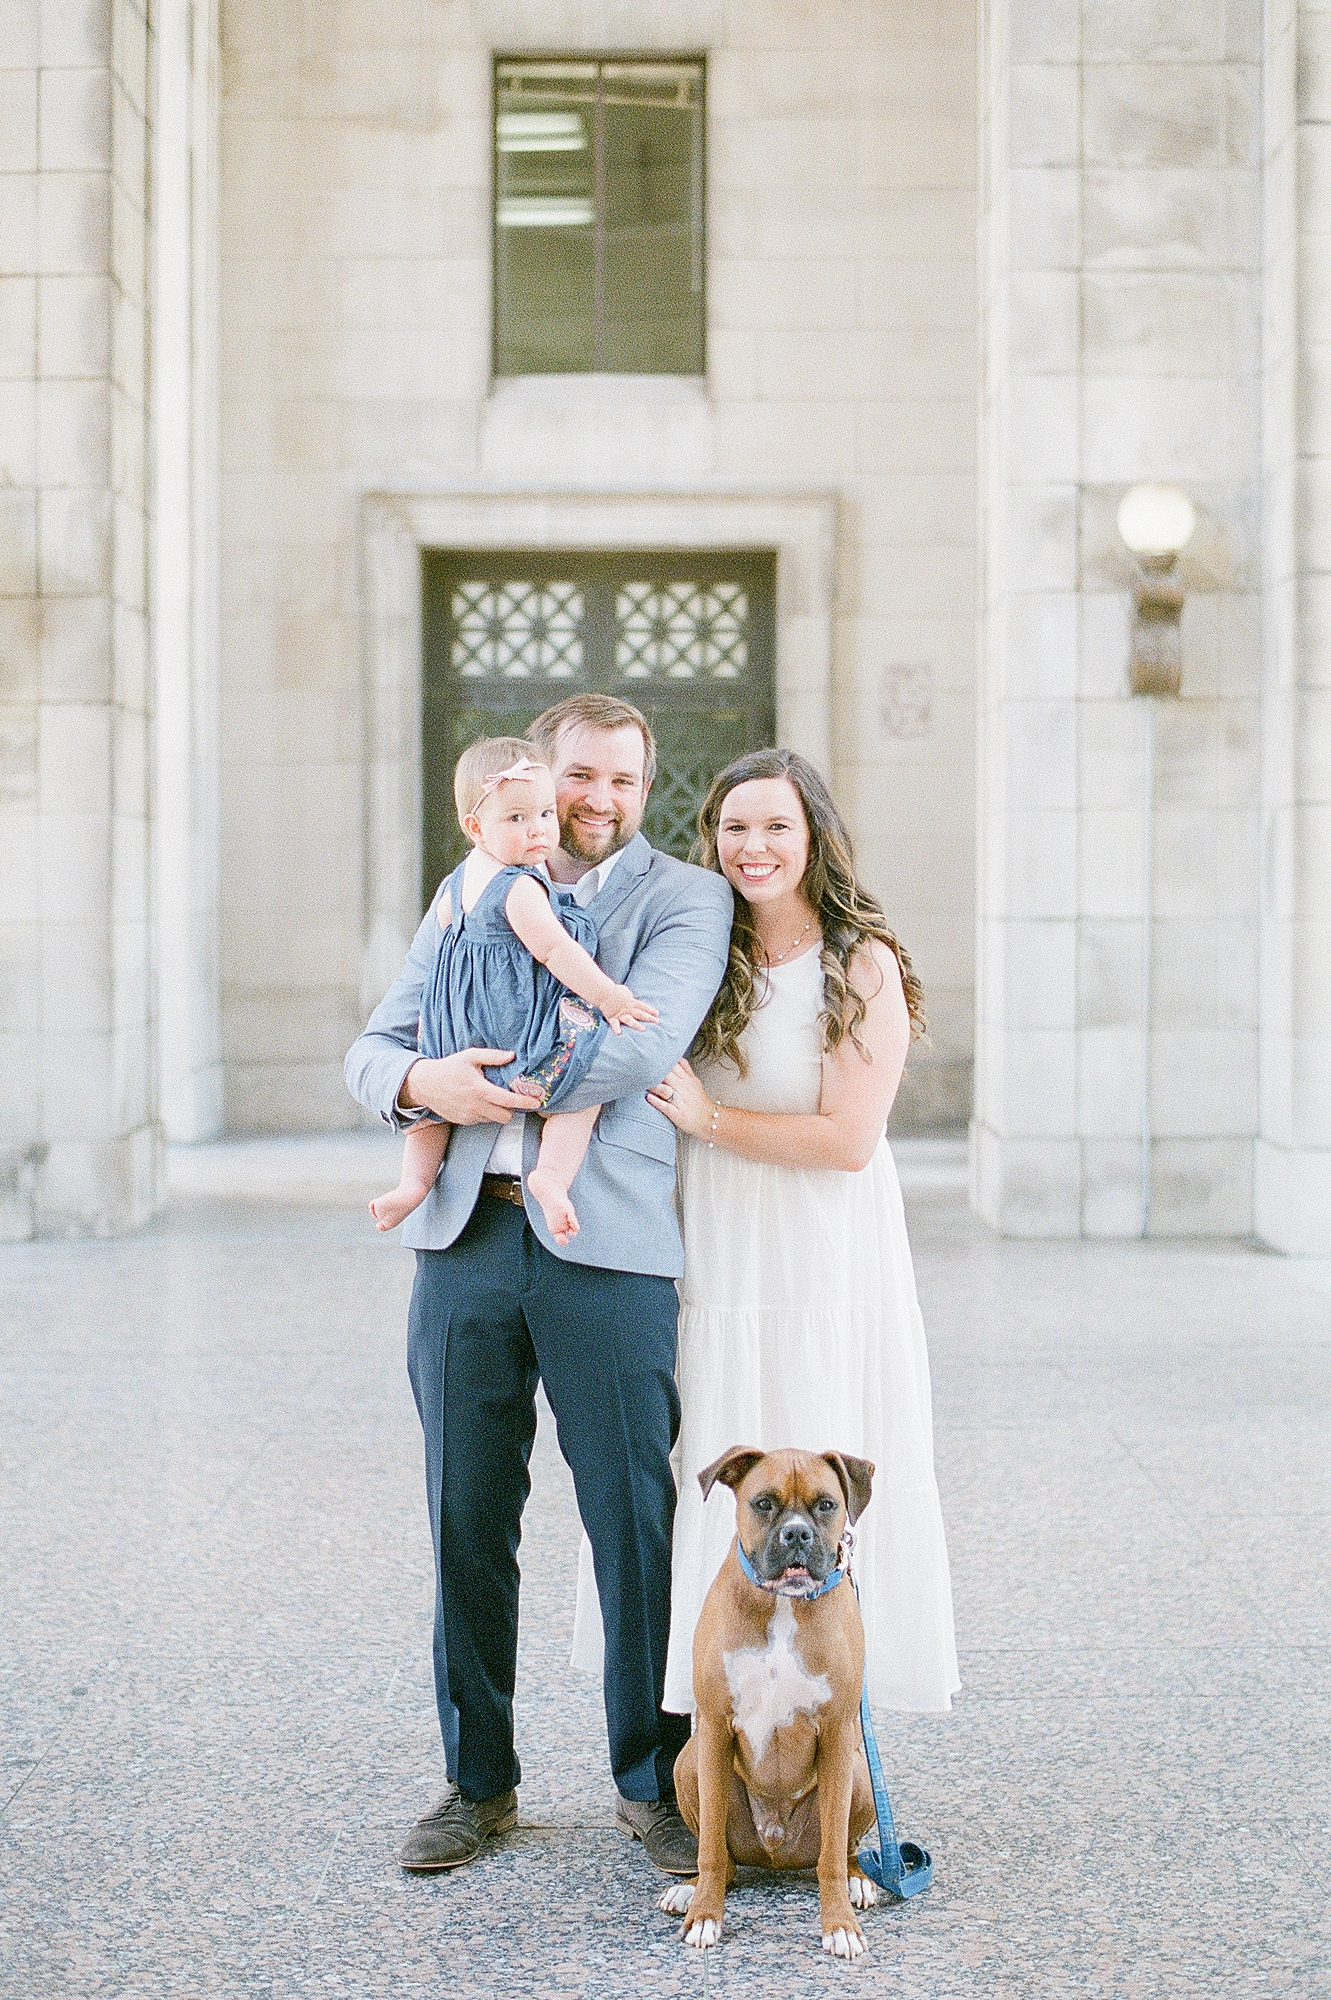 a husband and wife are celebrating their 4 year wedding anniversary with portraits on fuji400h film with Nashville engagement and family photographer Dolly DeLong Photographer at the War Memorial in Nashville